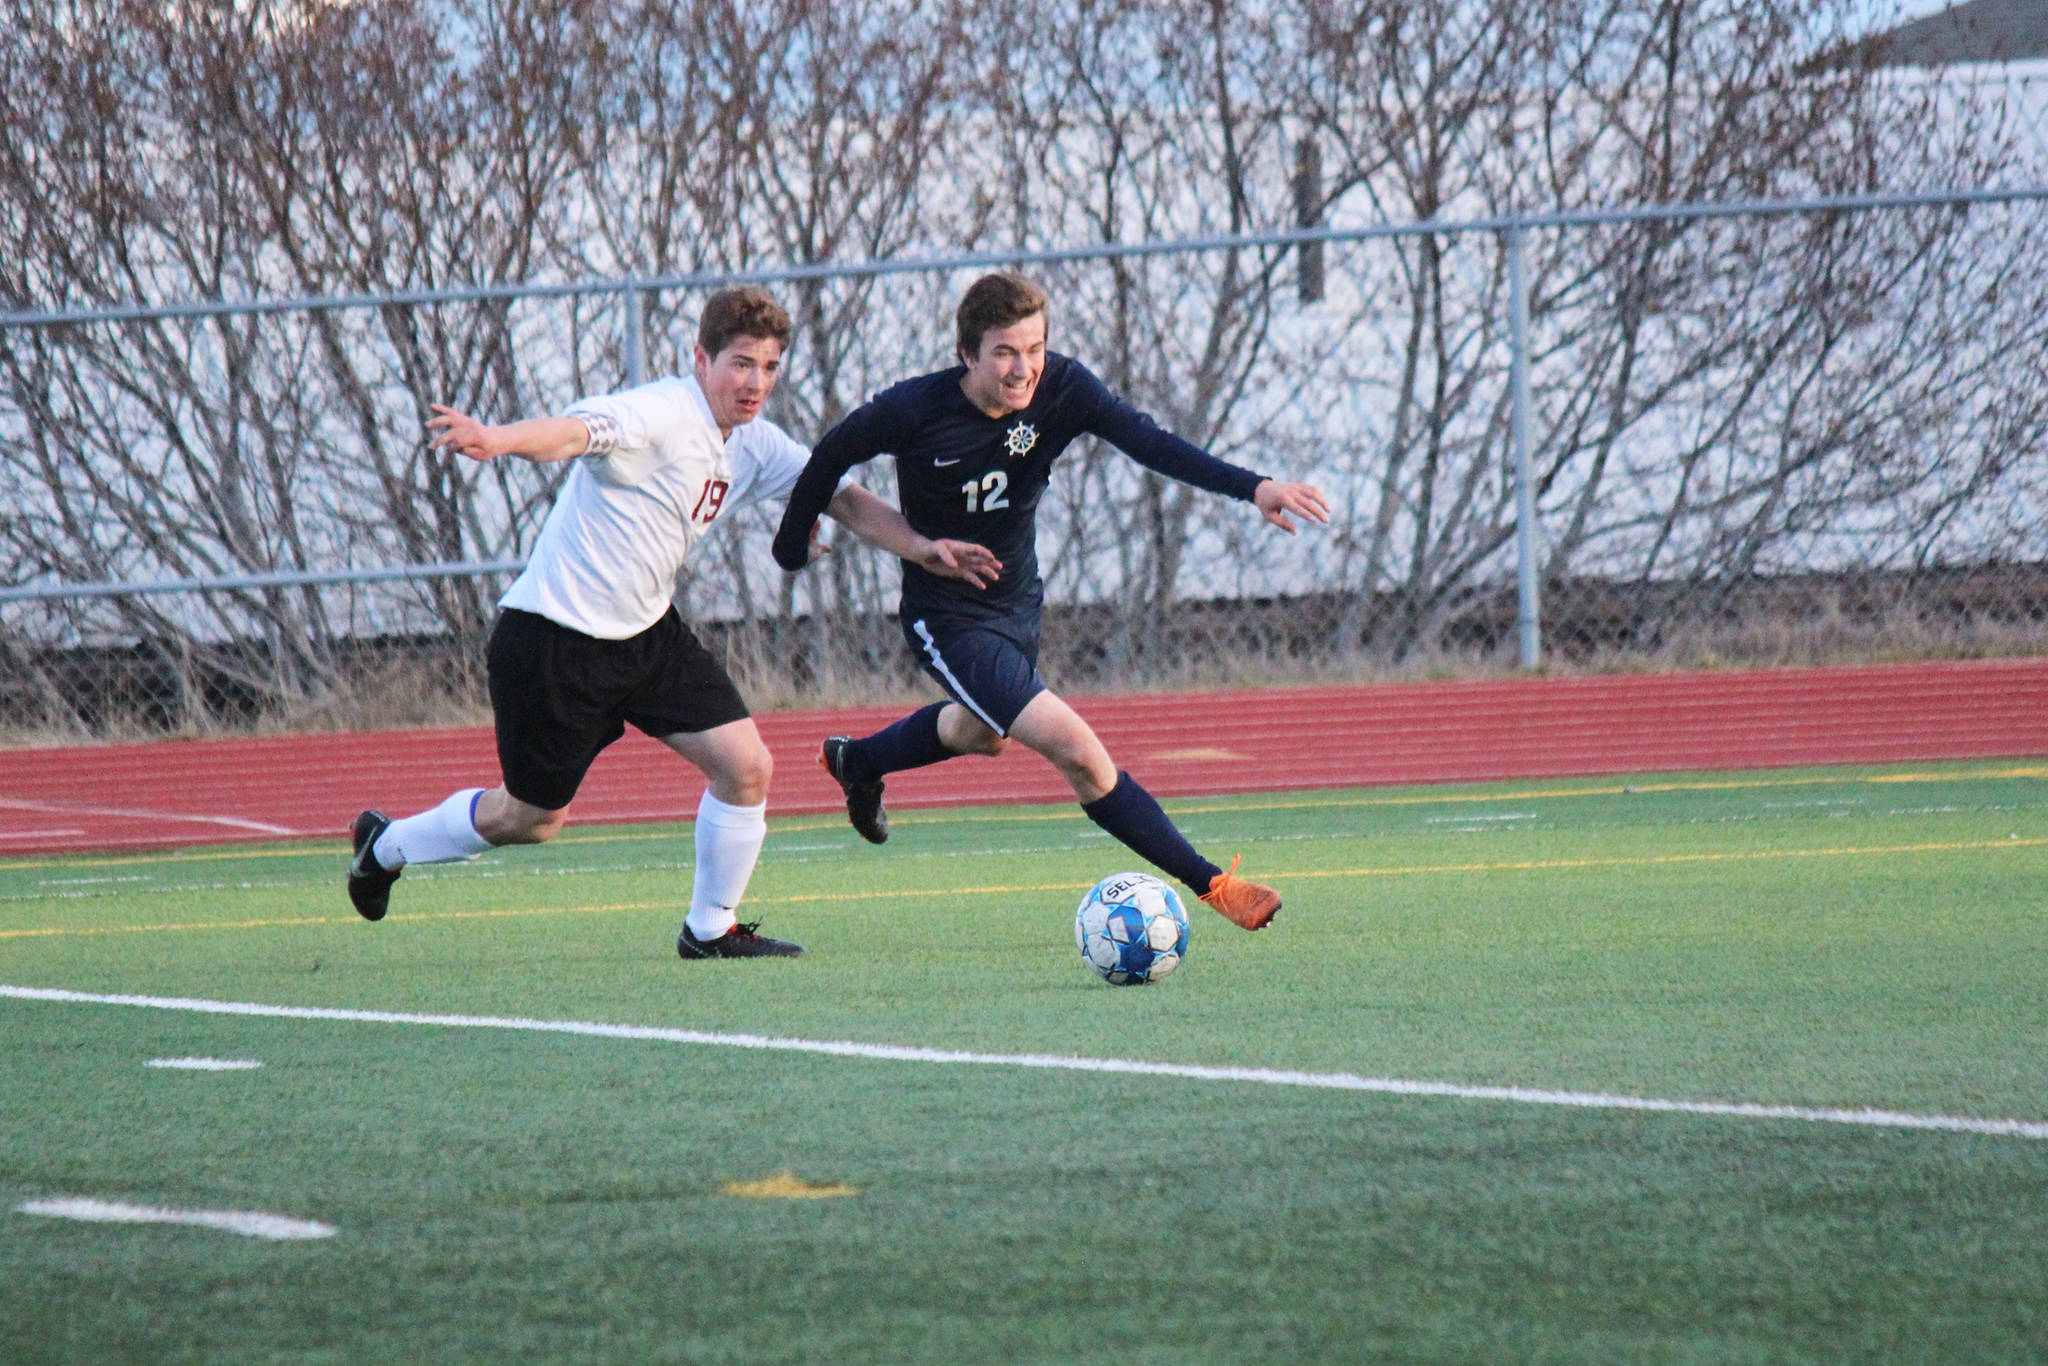 In some one-on-one action at Friday’s varsity soccer game against Grace Christian, on Friday, April 26, 2019, at the high school in Homer, Alaska Mariner Daniel Reutov, 12, sends the ball down the field. (Photo by McKibben Jackinsky)